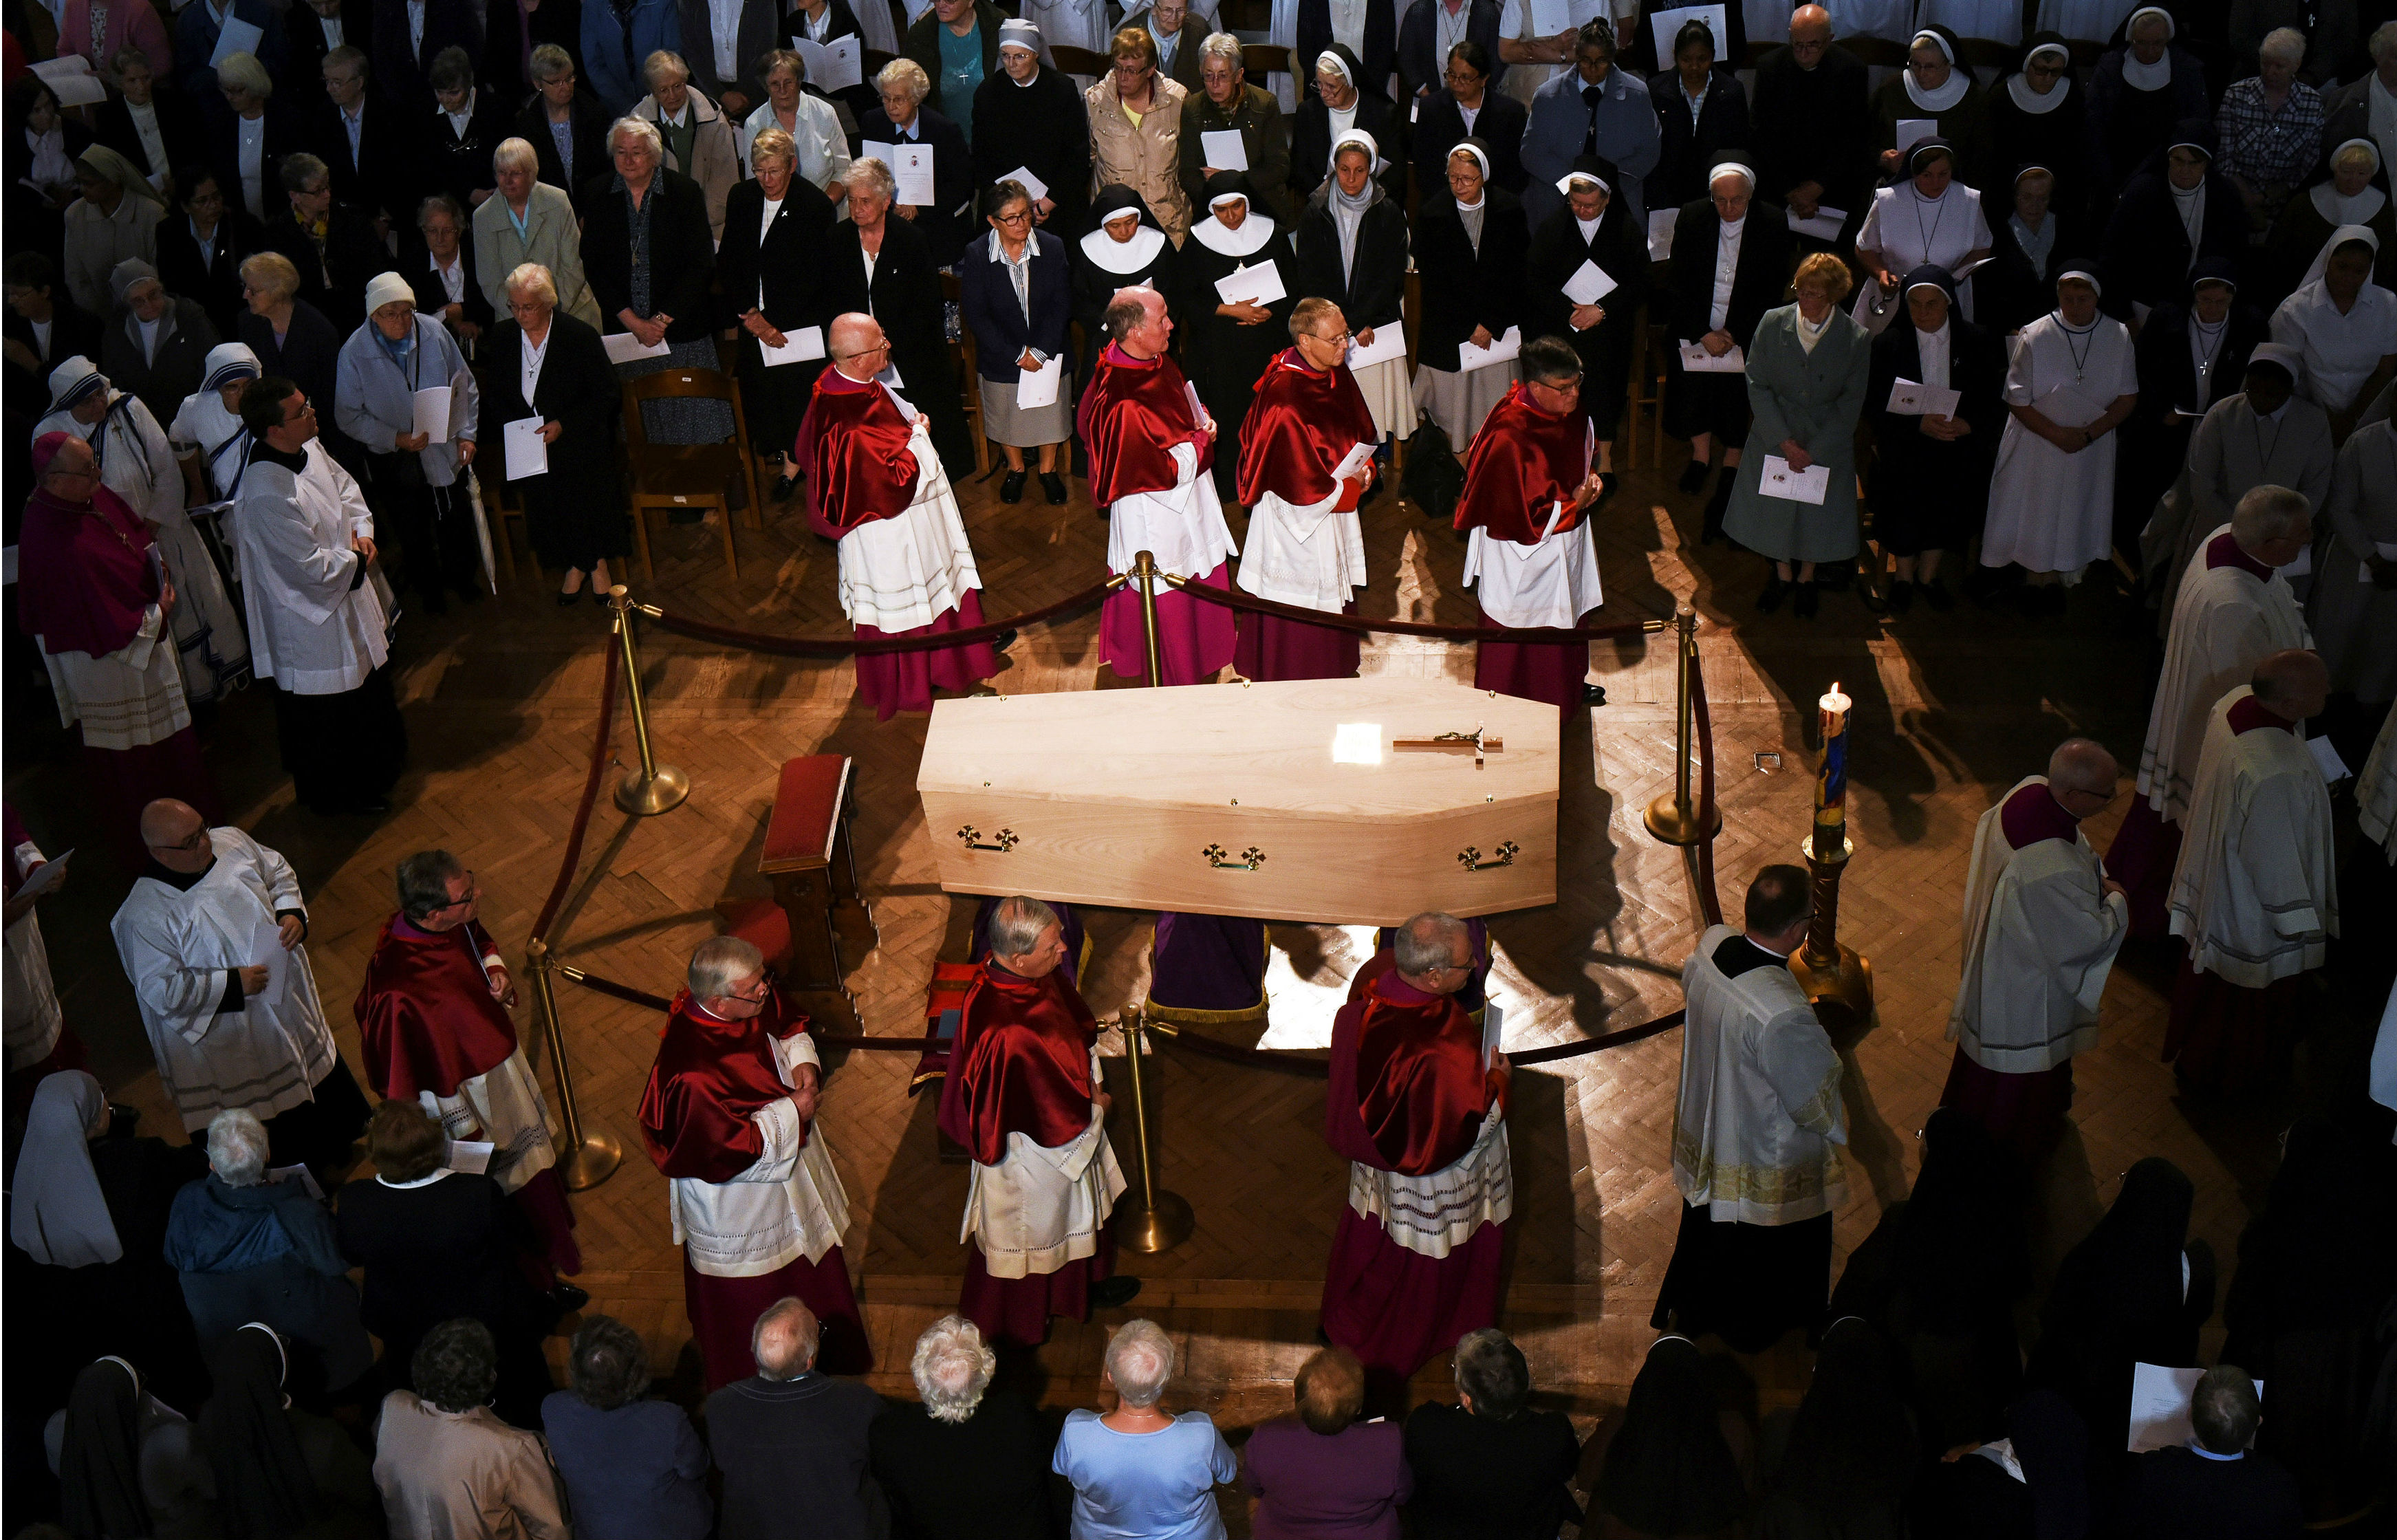 Life, faith and many friendships of Cardinal Cormac Murphy-O’Connor celebrated at Westminster Cathedral funeral